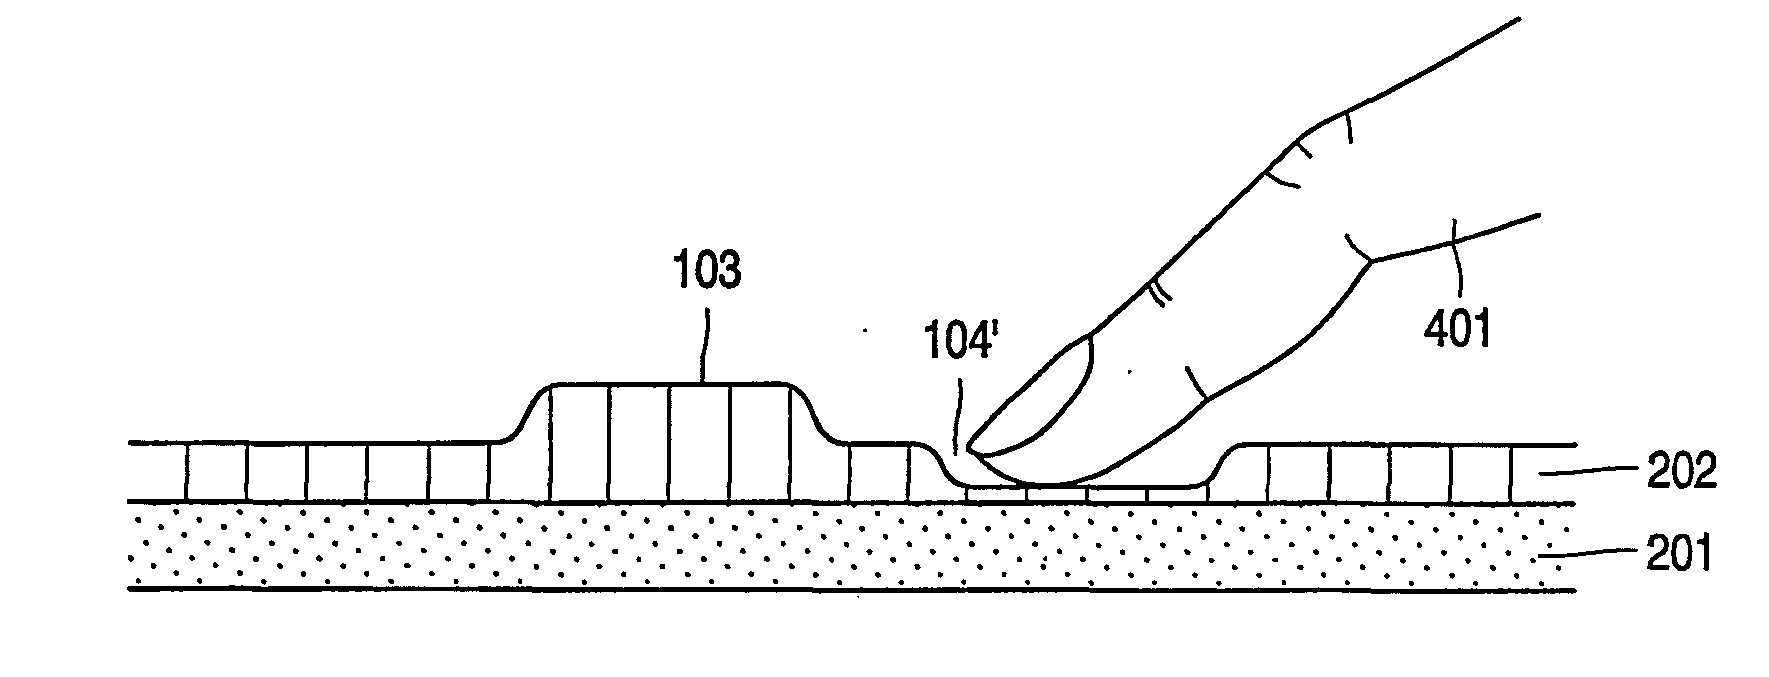 Display system with tactile guidance